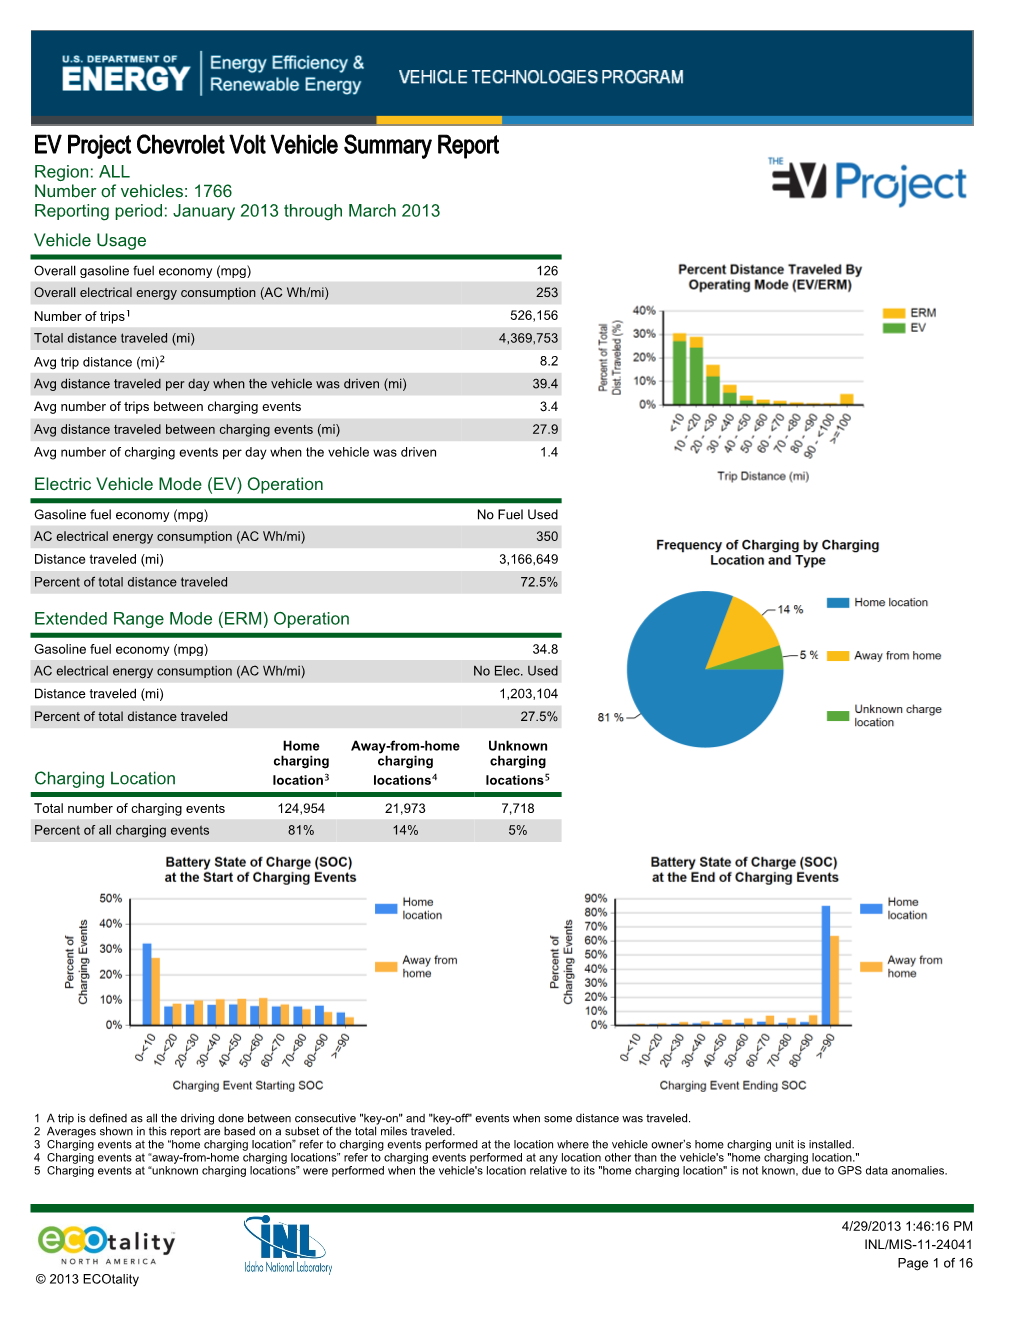 EV Project Chevrolet Volt Vehicle Summary Report Region: ALL Number of Vehicles: 1766 Reporting Period: January 2013 Through March 2013 Vehicle Usage